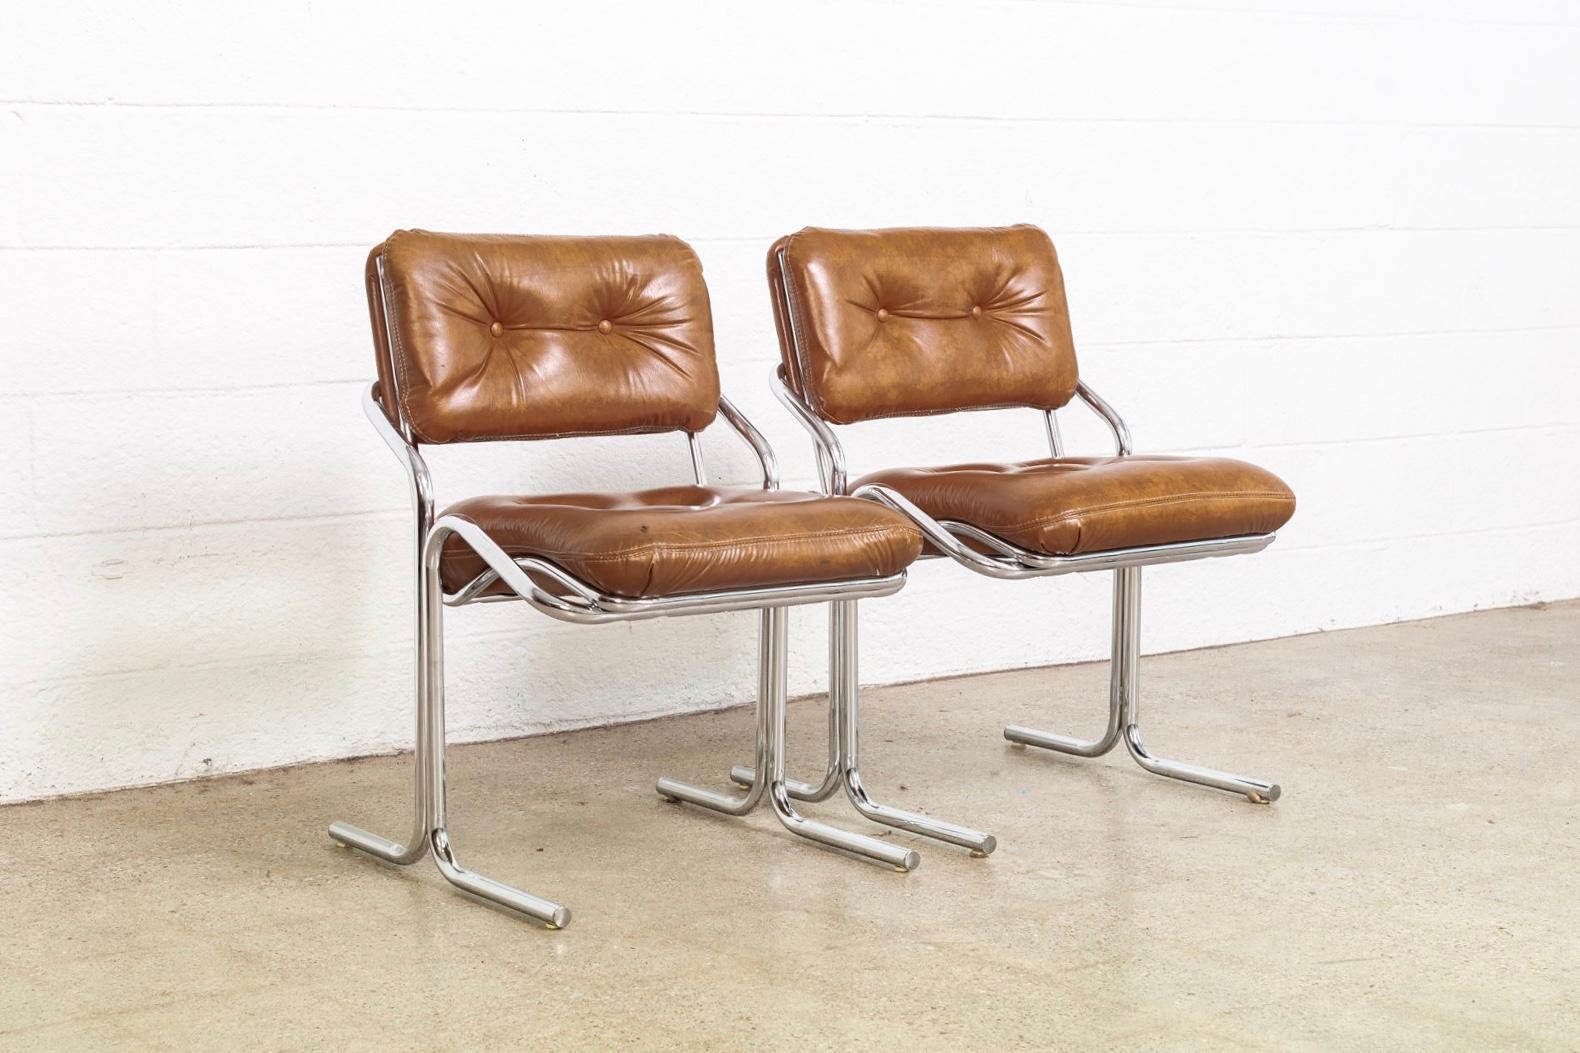 This pair of vintage midcentury side chairs was produced by Cal-Style Furniture Co. in 1981. They have fabulous 1970s style featuring a tubular chrome cantilever base with beautiful curvilinear form and cognac brown tufted upholstered Naugahyde